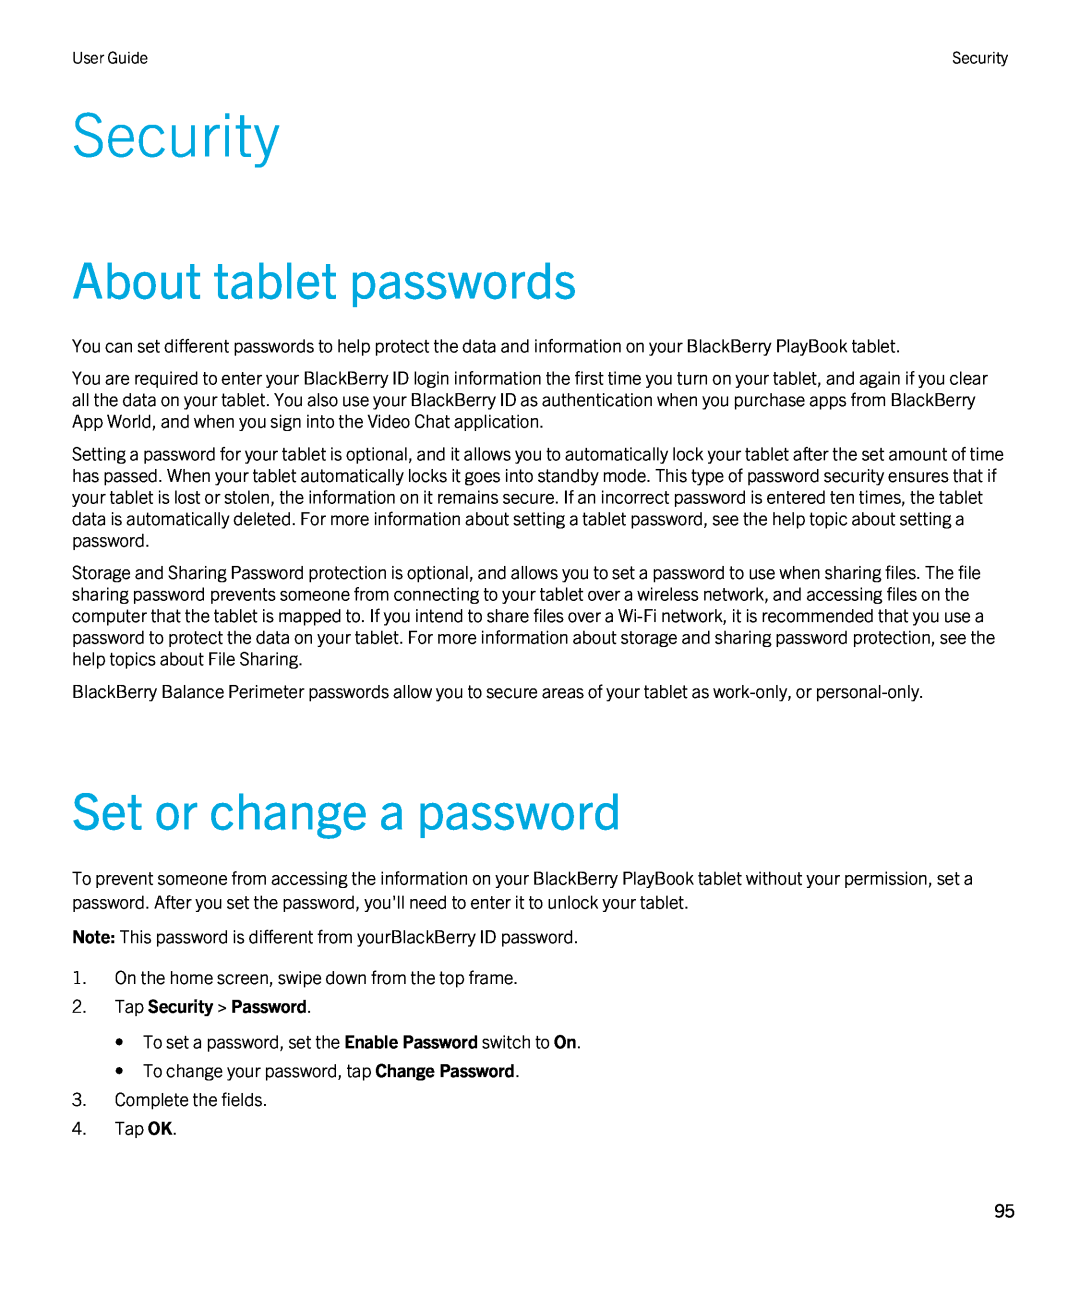 Blackberry 2.0.1 manual About tablet passwords, Set or change a password, Tap Security Password 